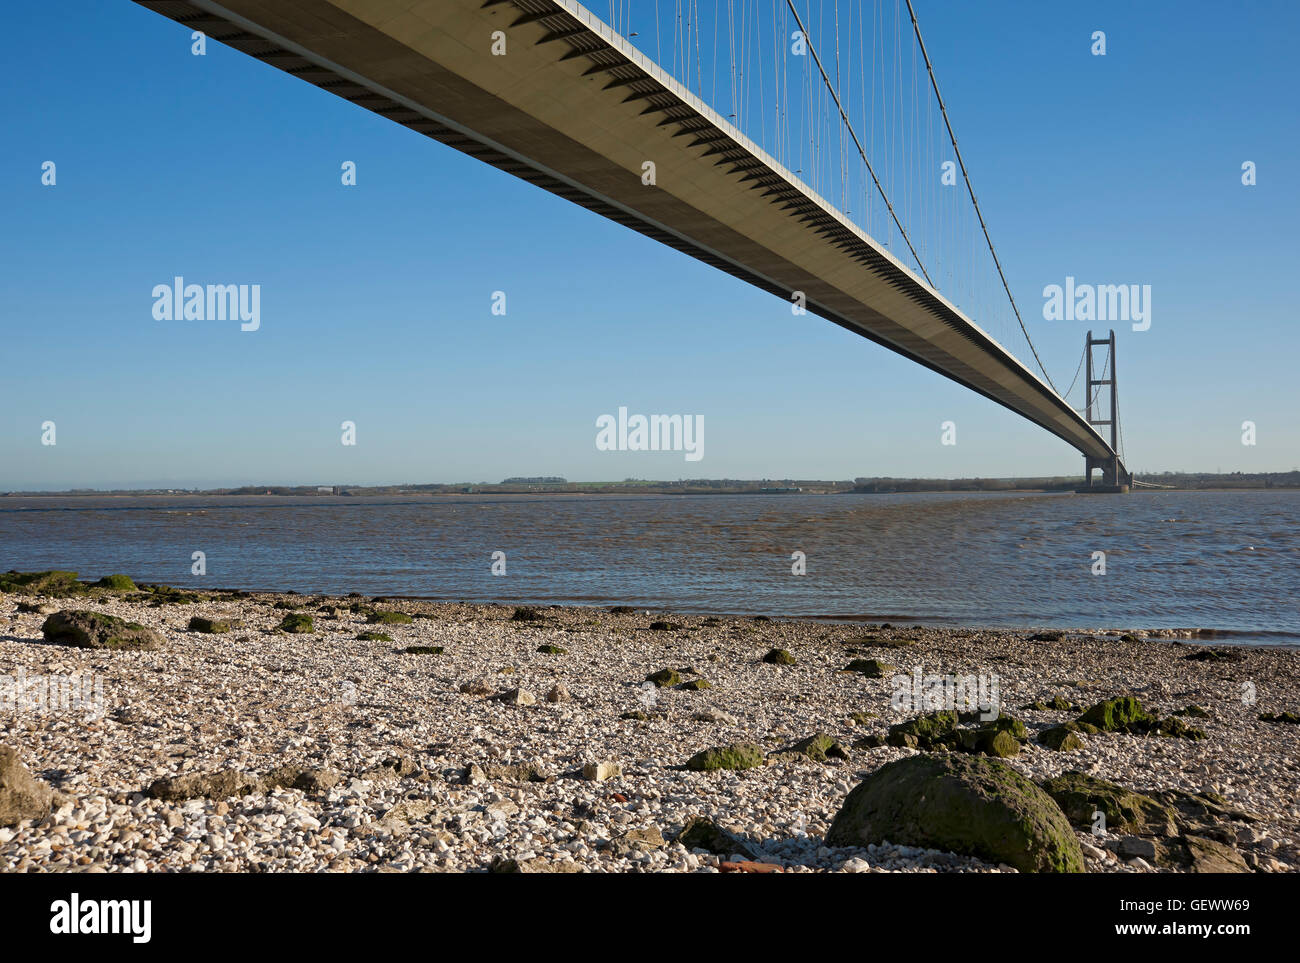 The Humber Bridge which is a single span suspension bridge connecting East Yorkshire with North Lincolnshire near to Hull. Stock Photo